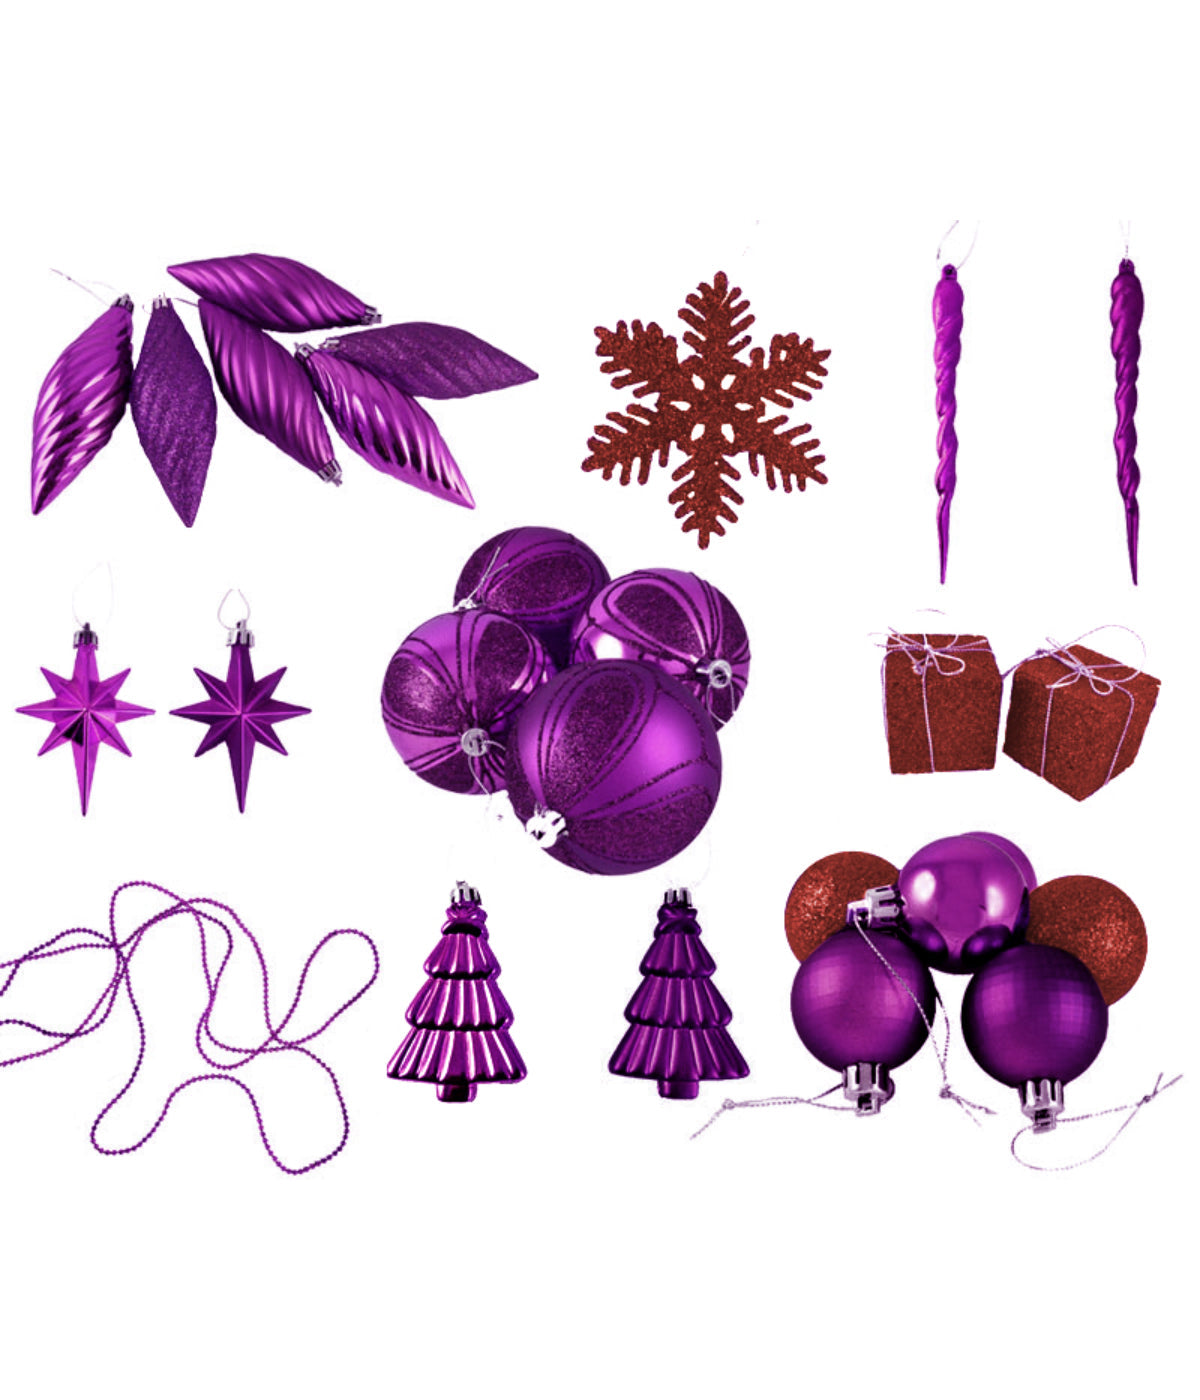 Purple & Red Shatterproof Christmas Ornaments, 125 Count, 5.5"